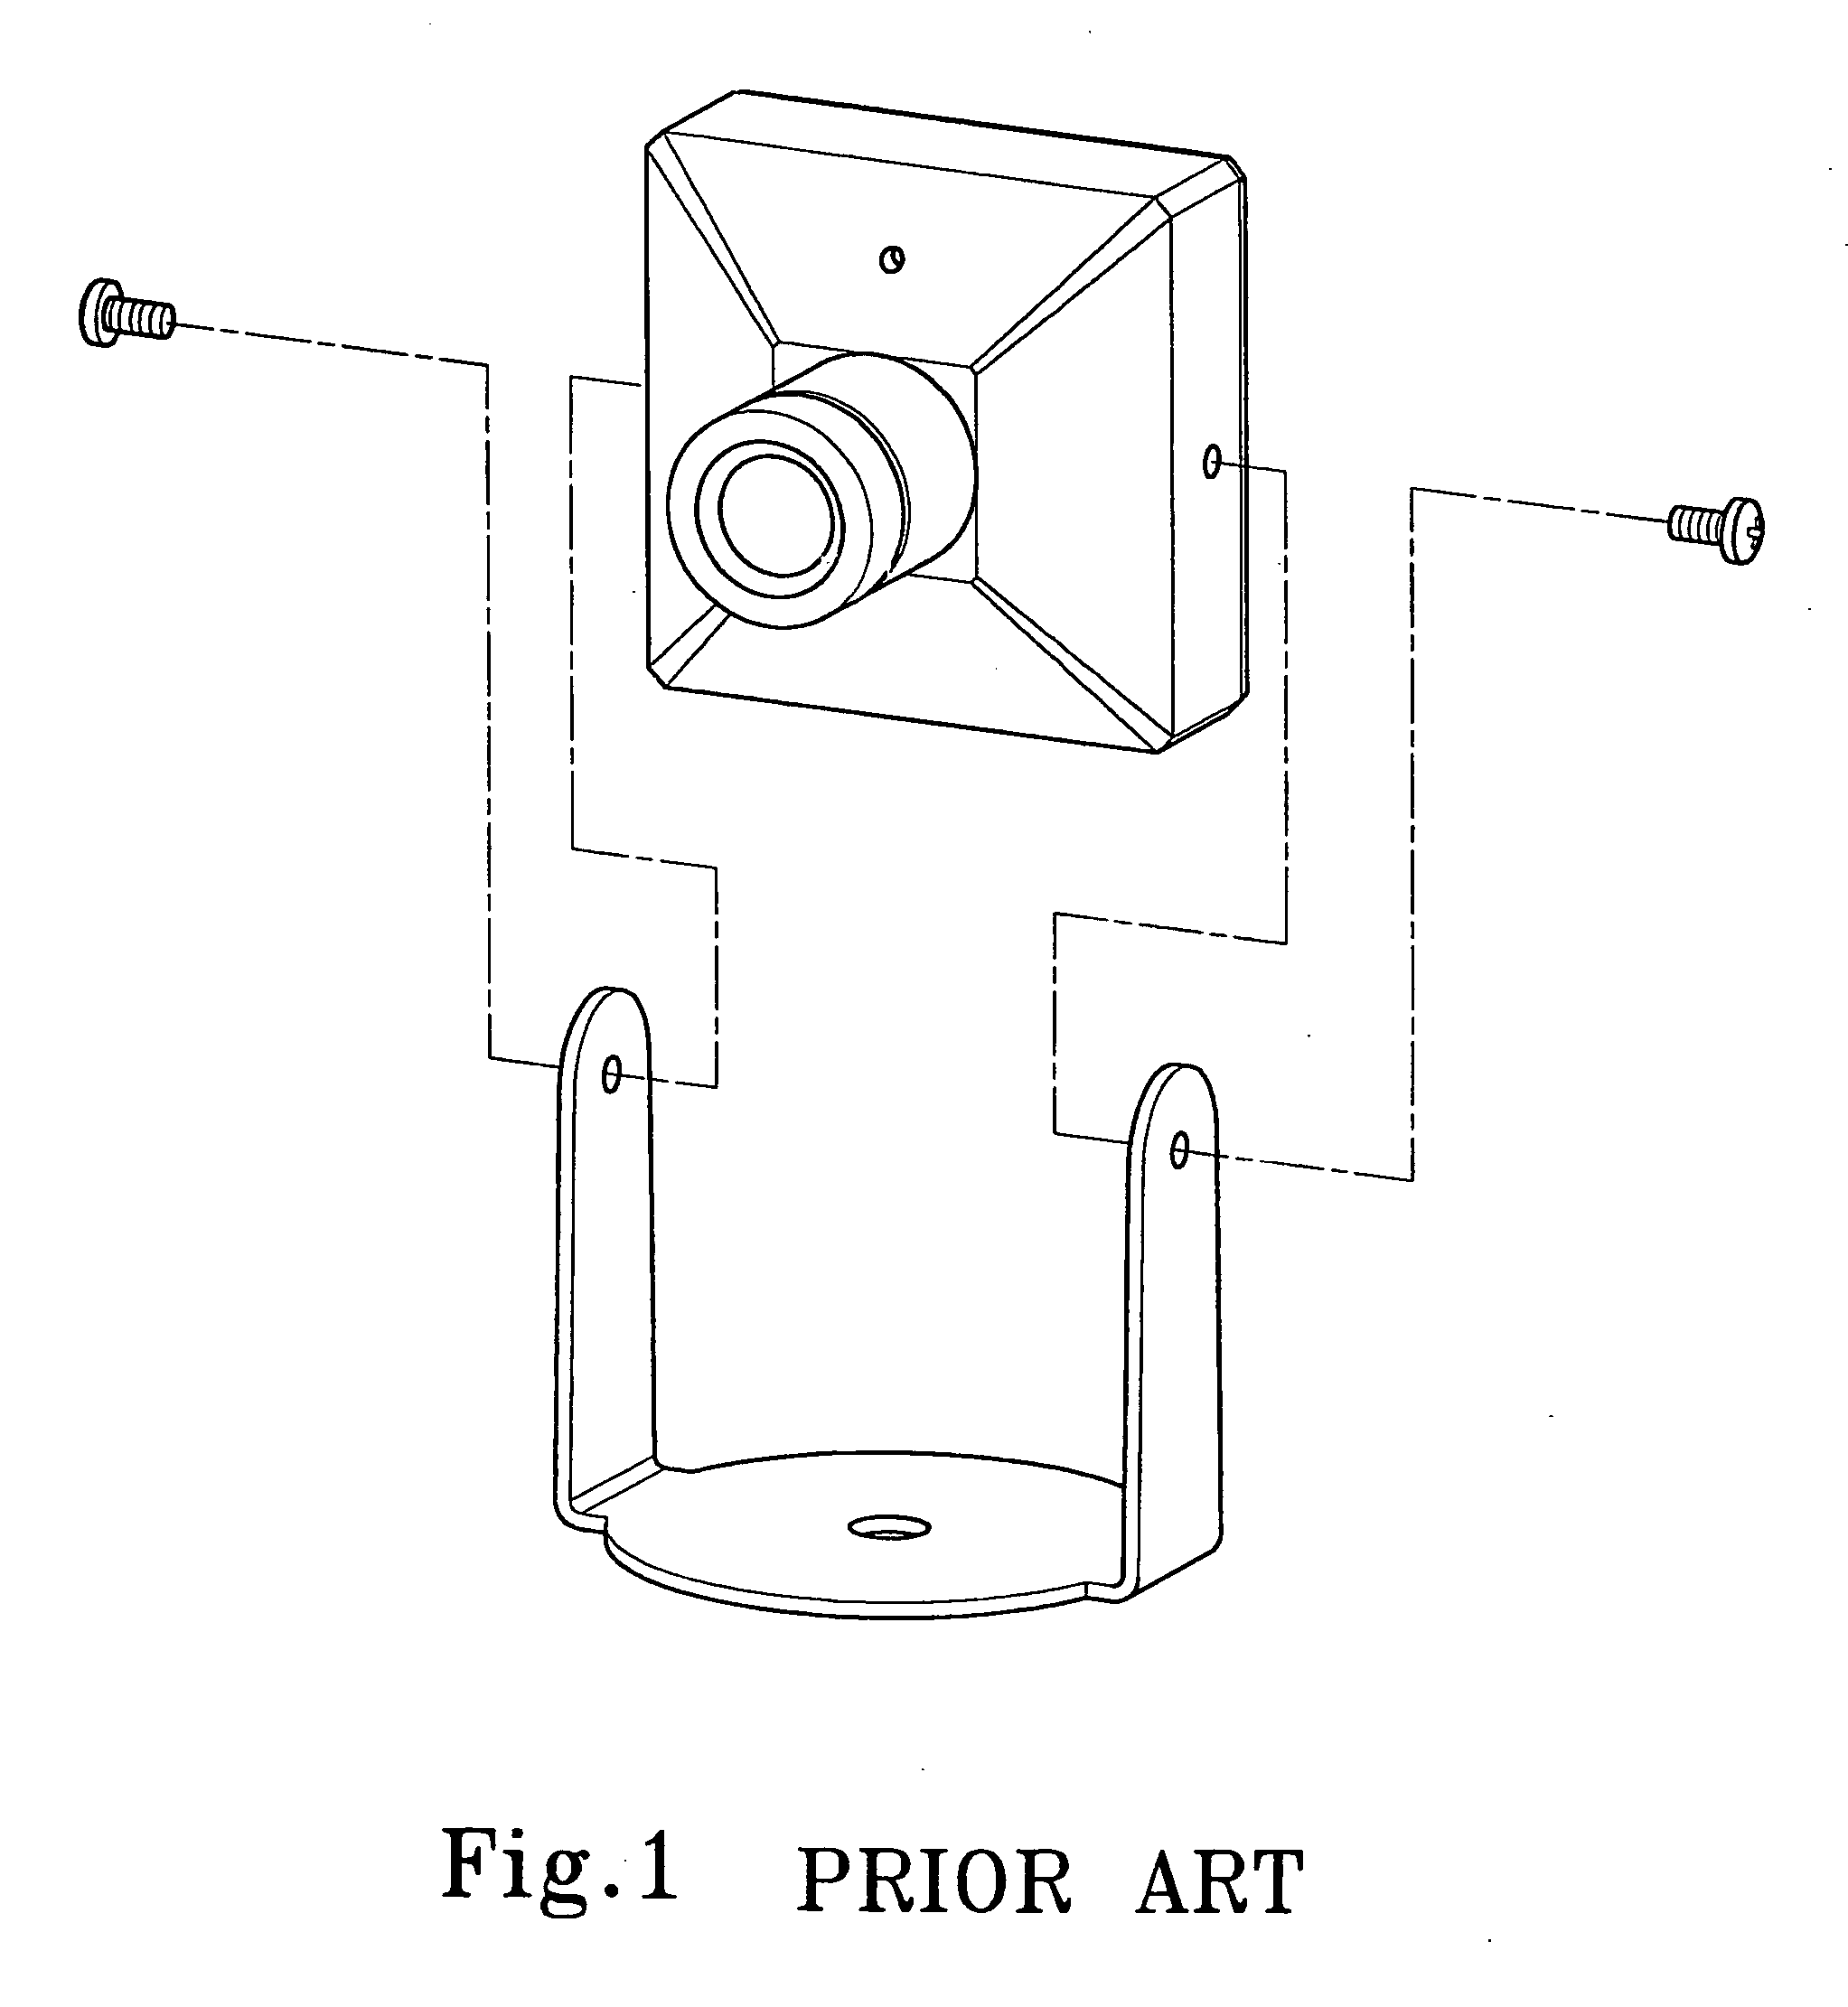 Mini-camera with an adjustable structure